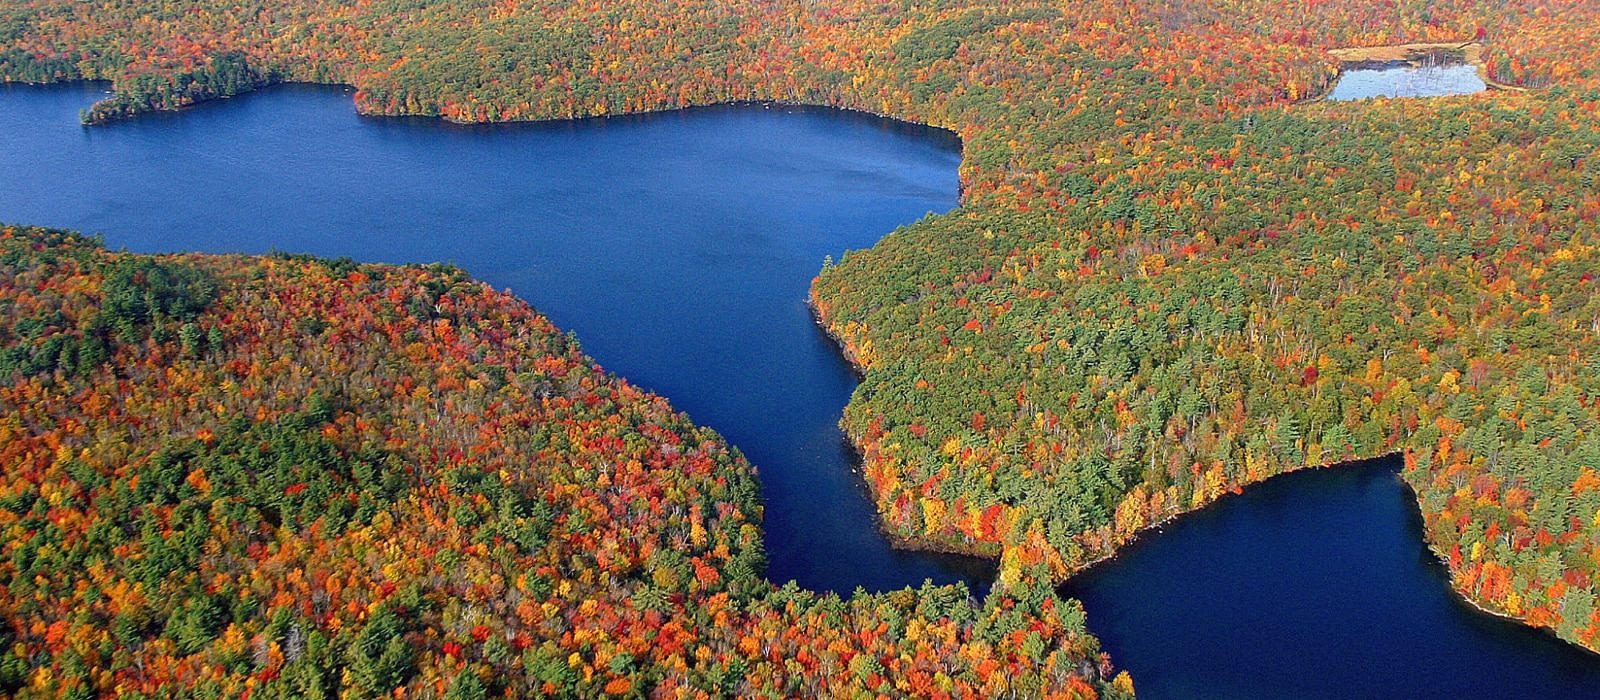 An aerial view of Spoonwood Pond, Nubanusit Lake, and surrounding conservation lands in full autumn foliage (photo © Eric Aldrich)